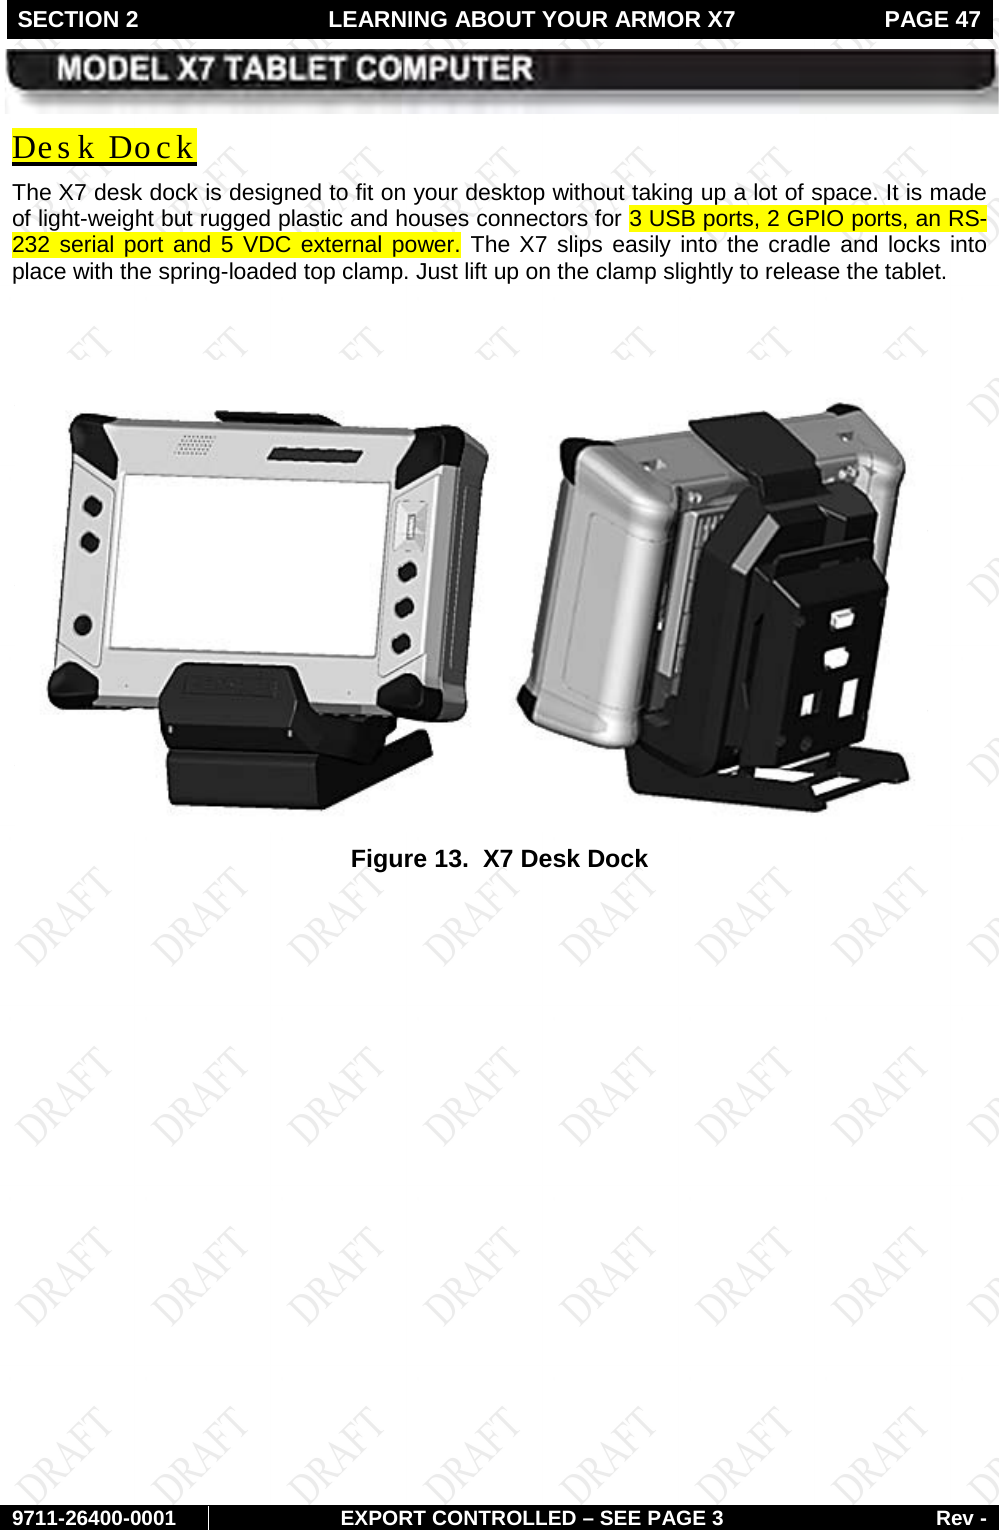 SECTION 2 LEARNING ABOUT YOUR ARMOR X7  PAGE 47        9711-26400-0001 EXPORT CONTROLLED – SEE PAGE 3 Rev - The X7 desk dock is designed to fit on your desktop without taking up a lot of space. It is made of light-weight but rugged plastic and houses connectors for 3 USB ports, 2 GPIO ports, an RS-232 serial port and 5 VDC external power. The X7 slips easily into the cradle and locks into place with the spring-loaded top clamp. Just lift up on the clamp slightly to release the tablet. Des k Dock   Figure 13.  X7 Desk Dock    